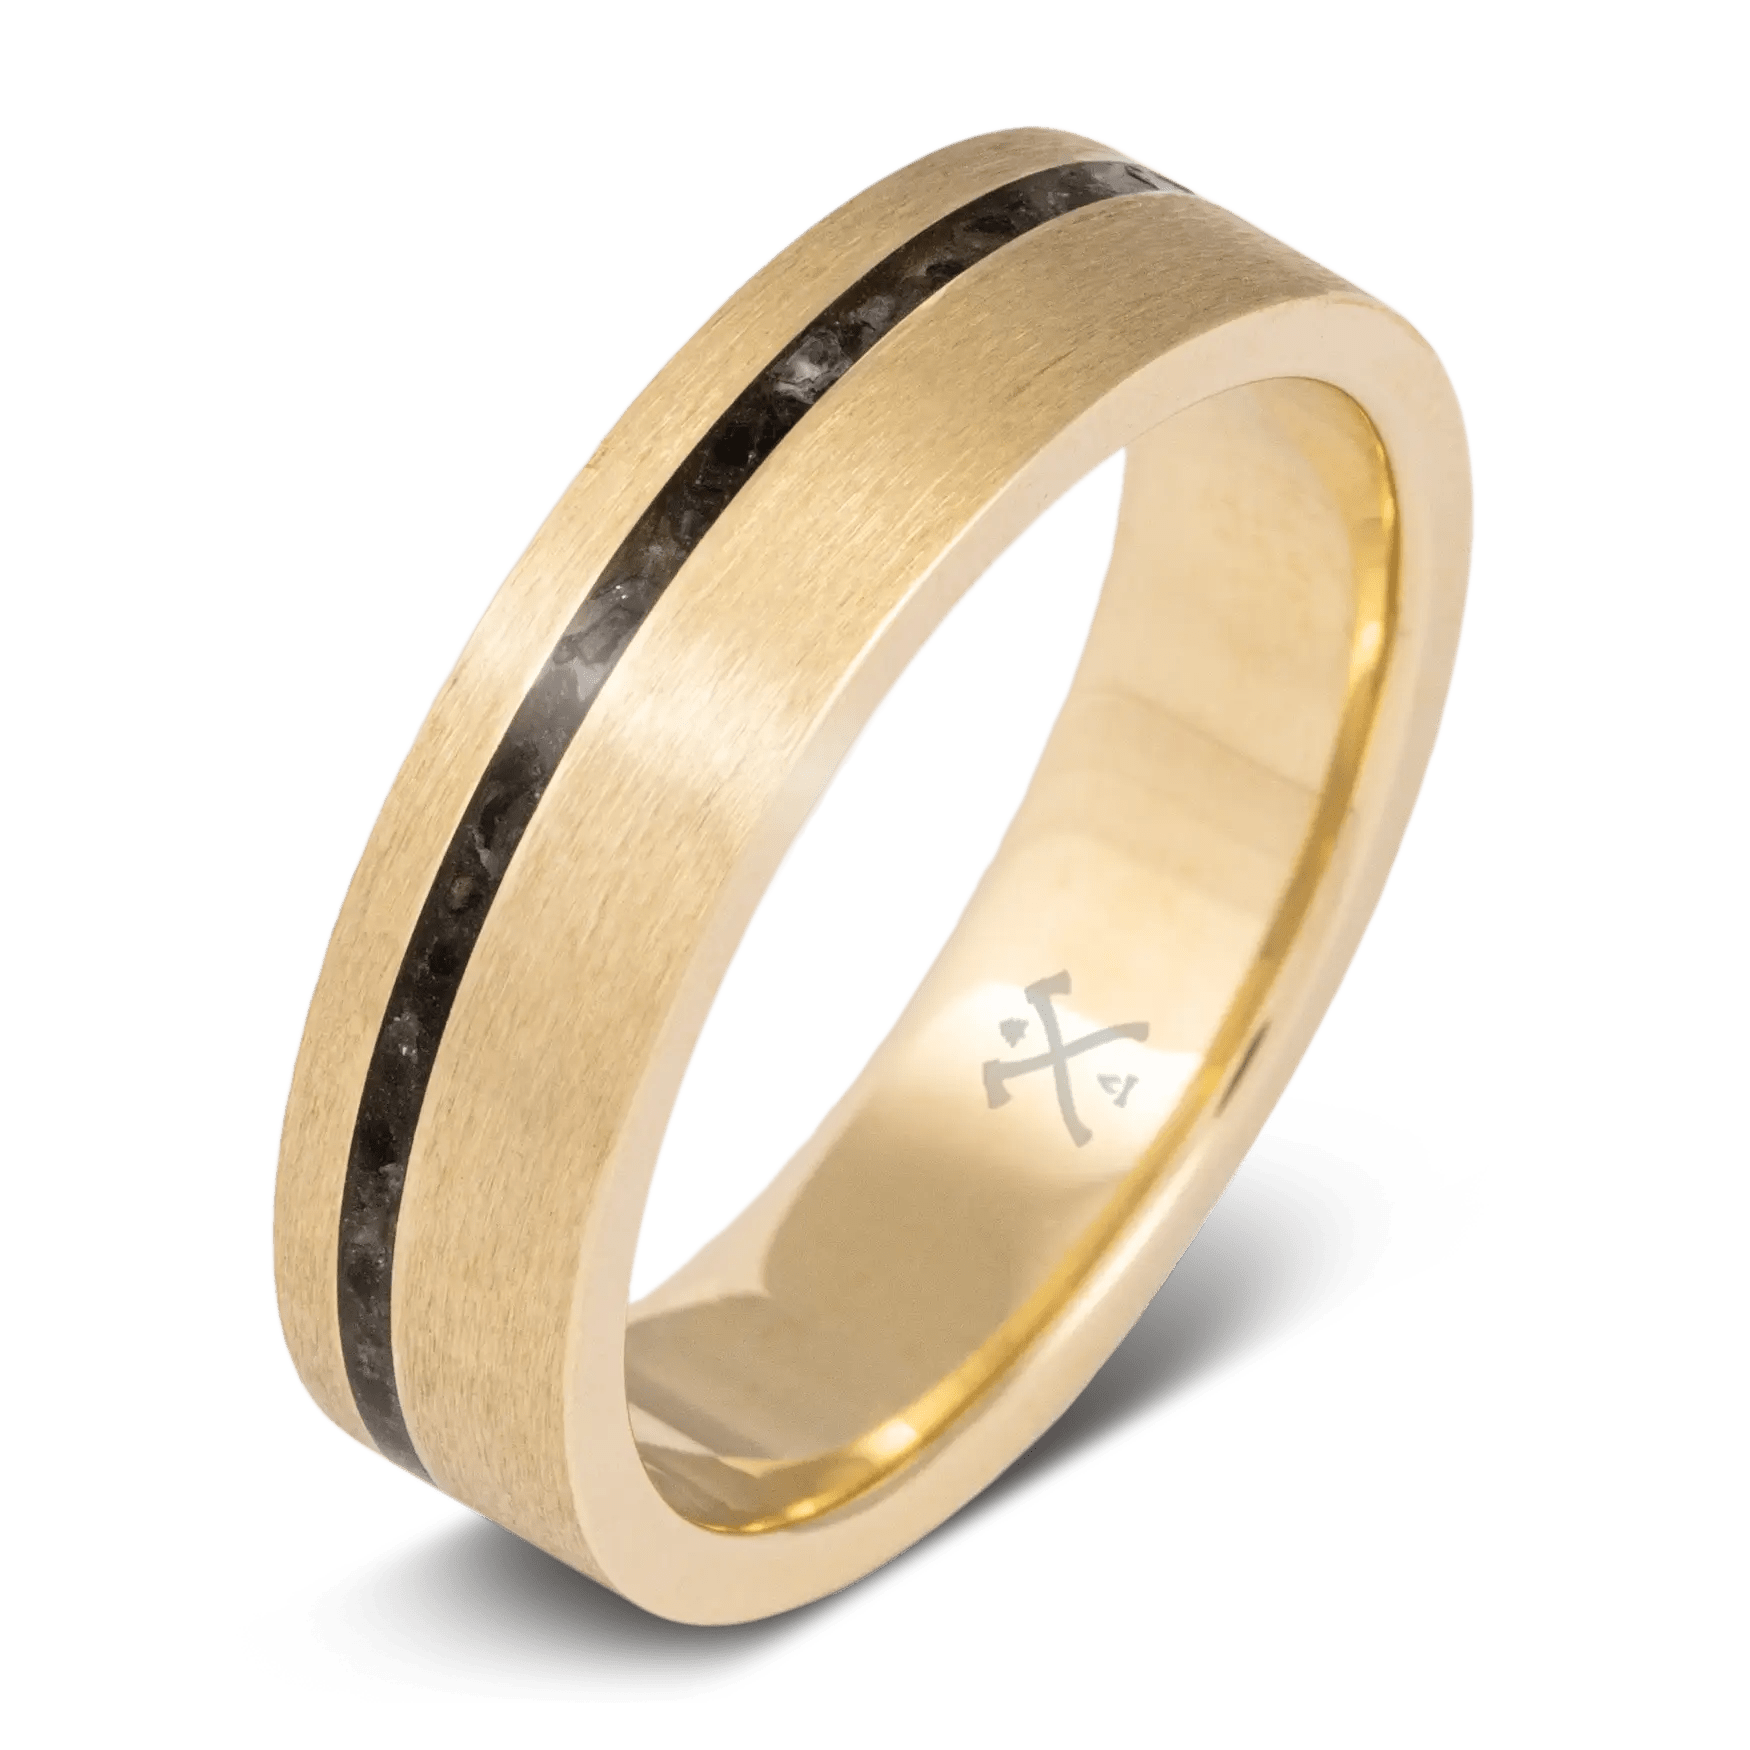 The Mercury. Mens gold wedding band made with yellow gold and obsidian